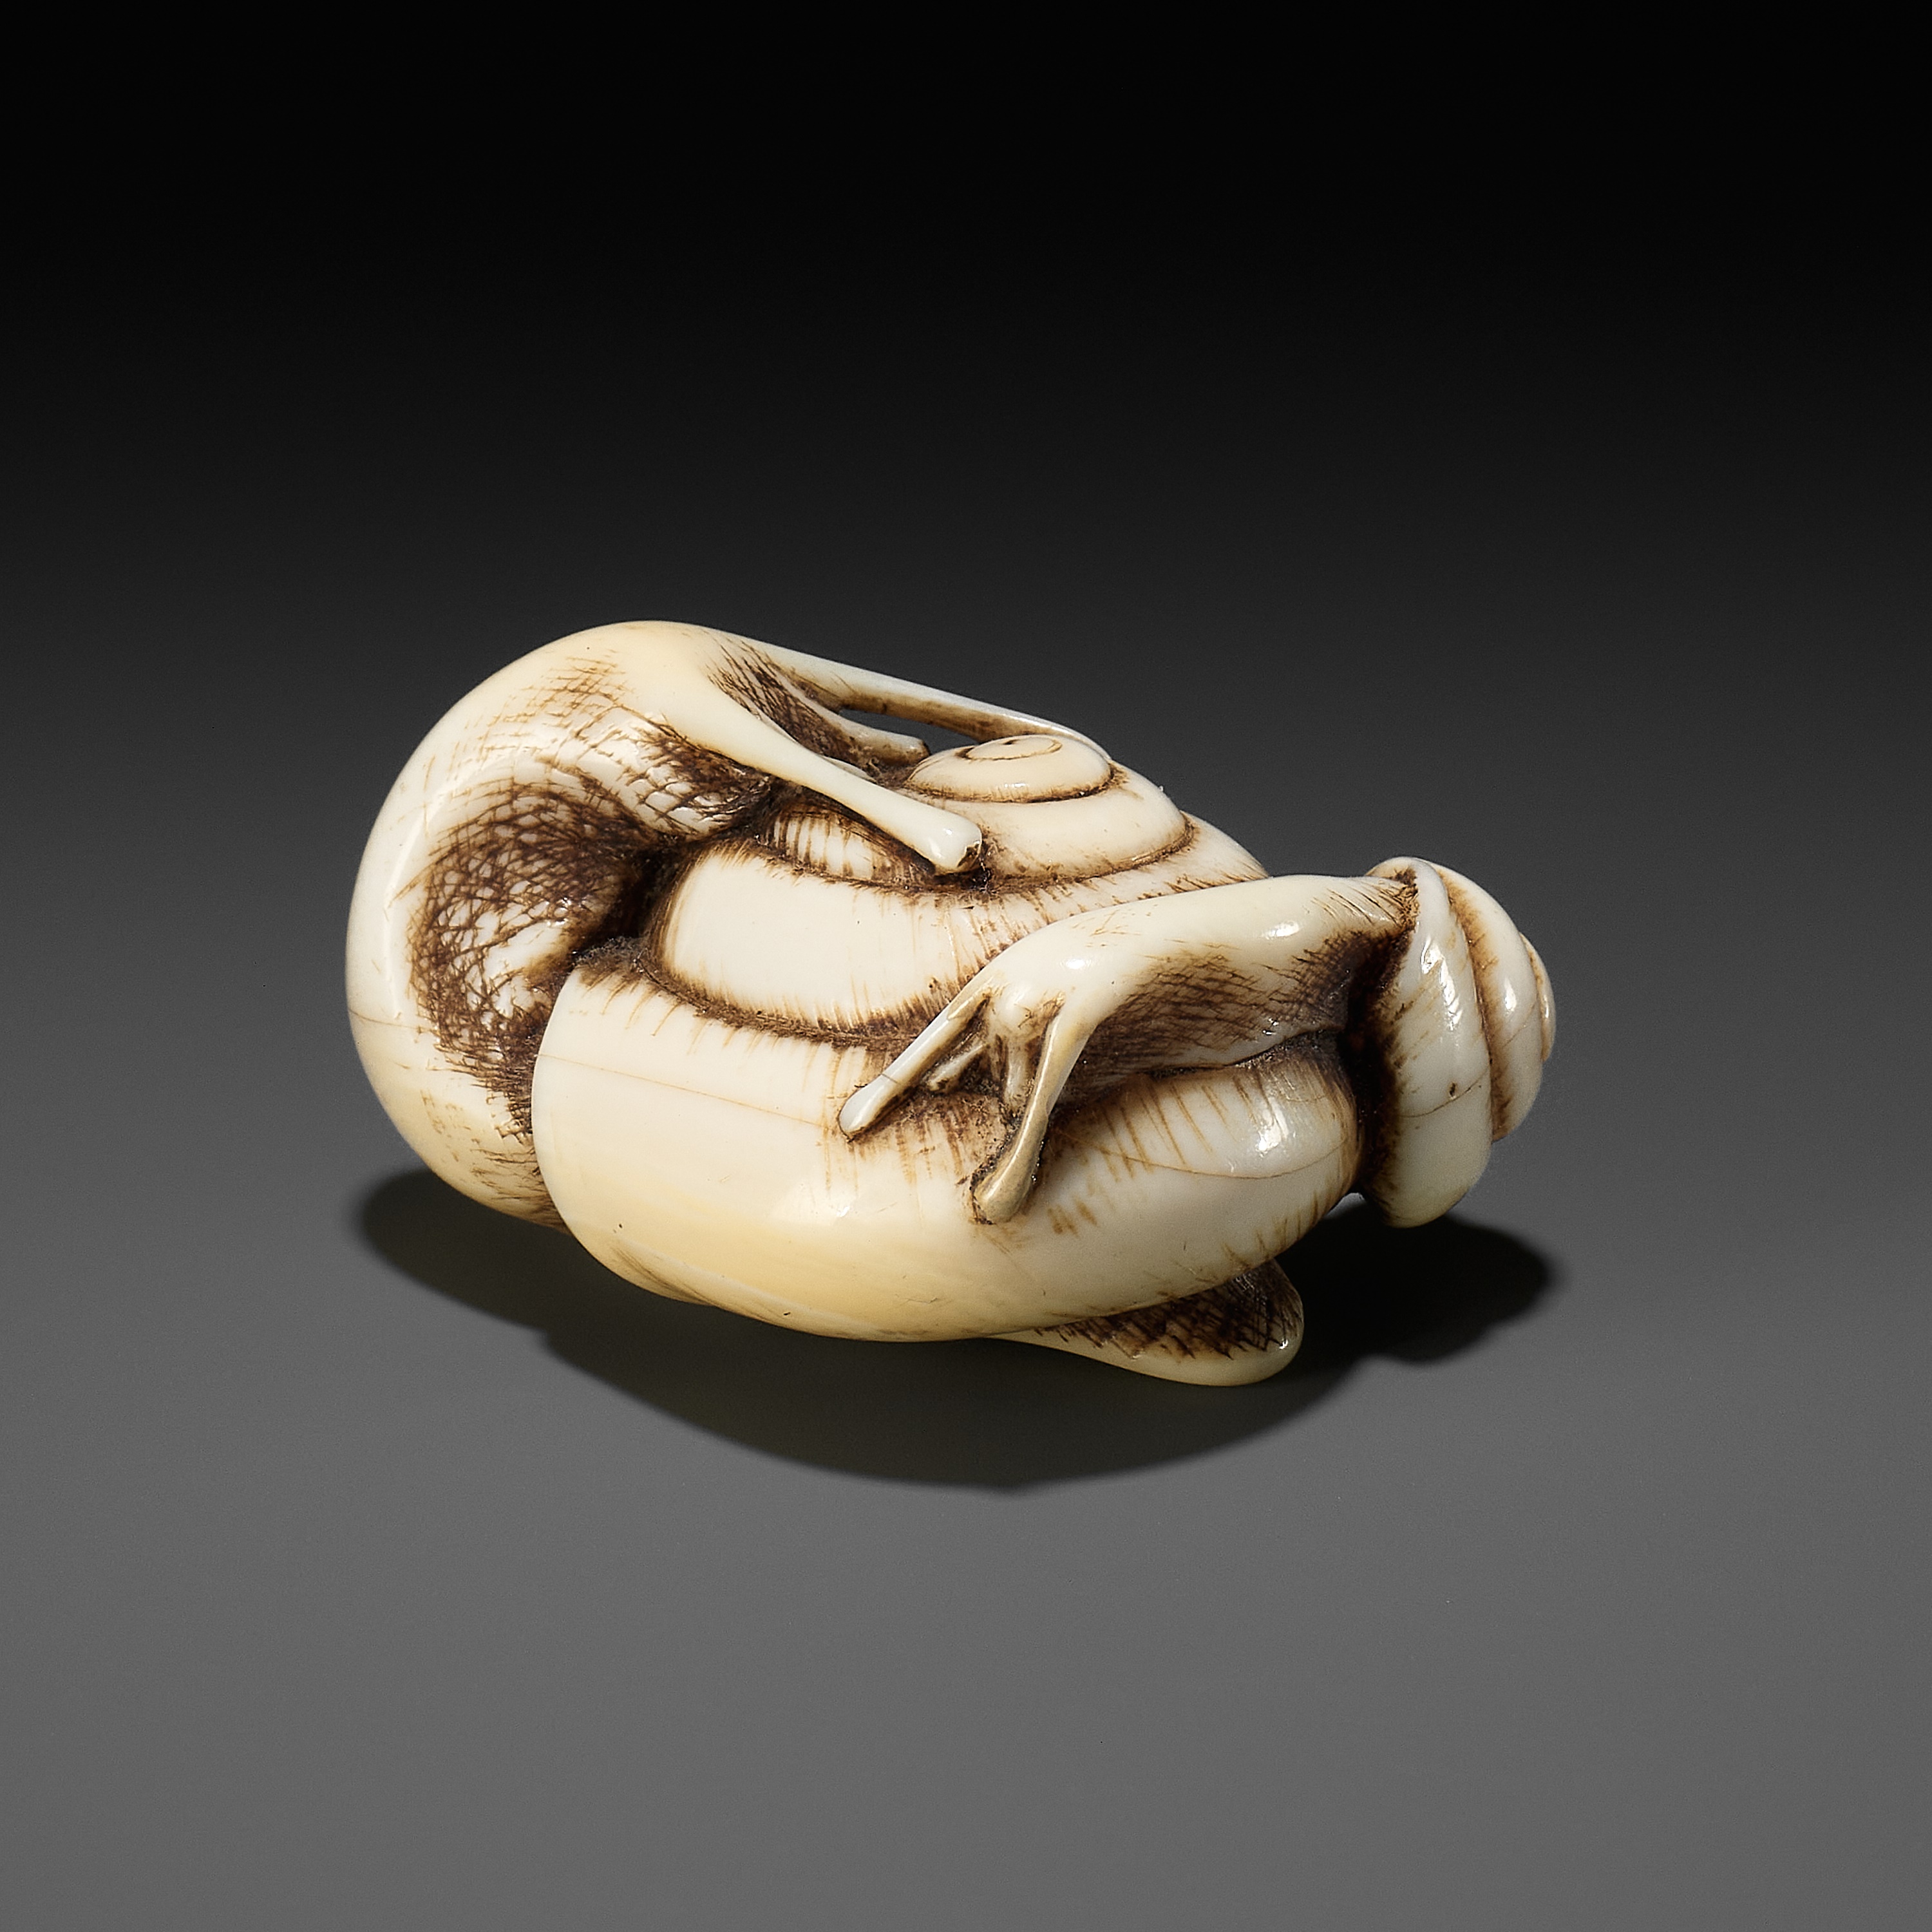 A FINE IVORY NETSUKE DEPICTING A PAIR OF SNAILS